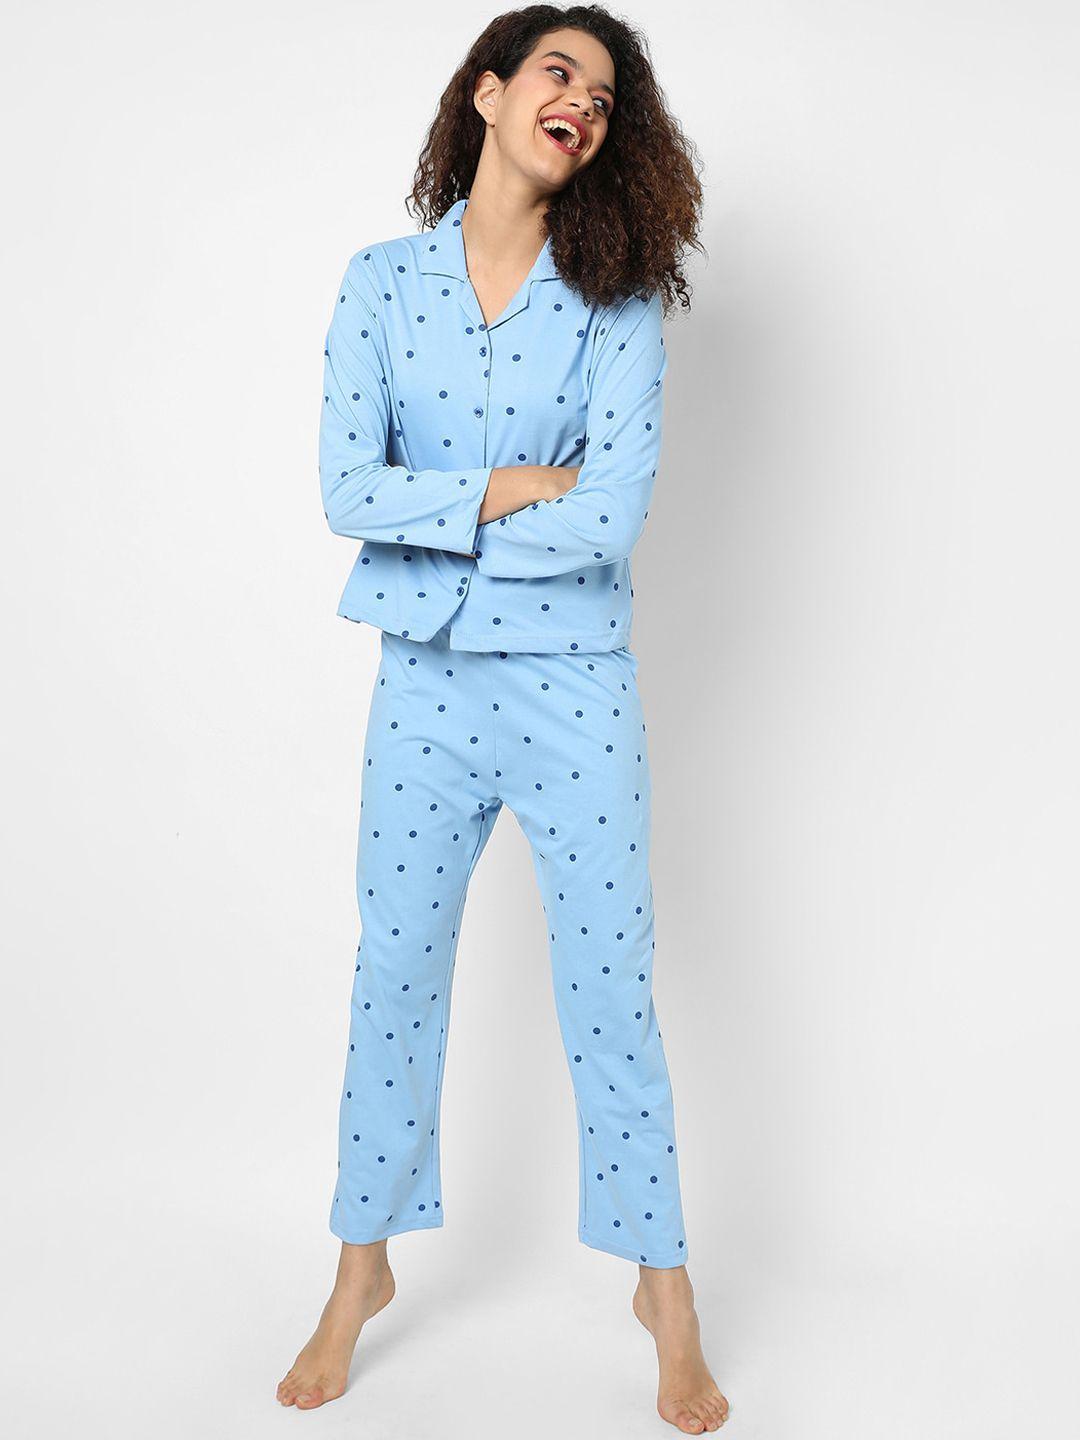 campus sutra women blue polka dot printed cotton night suit